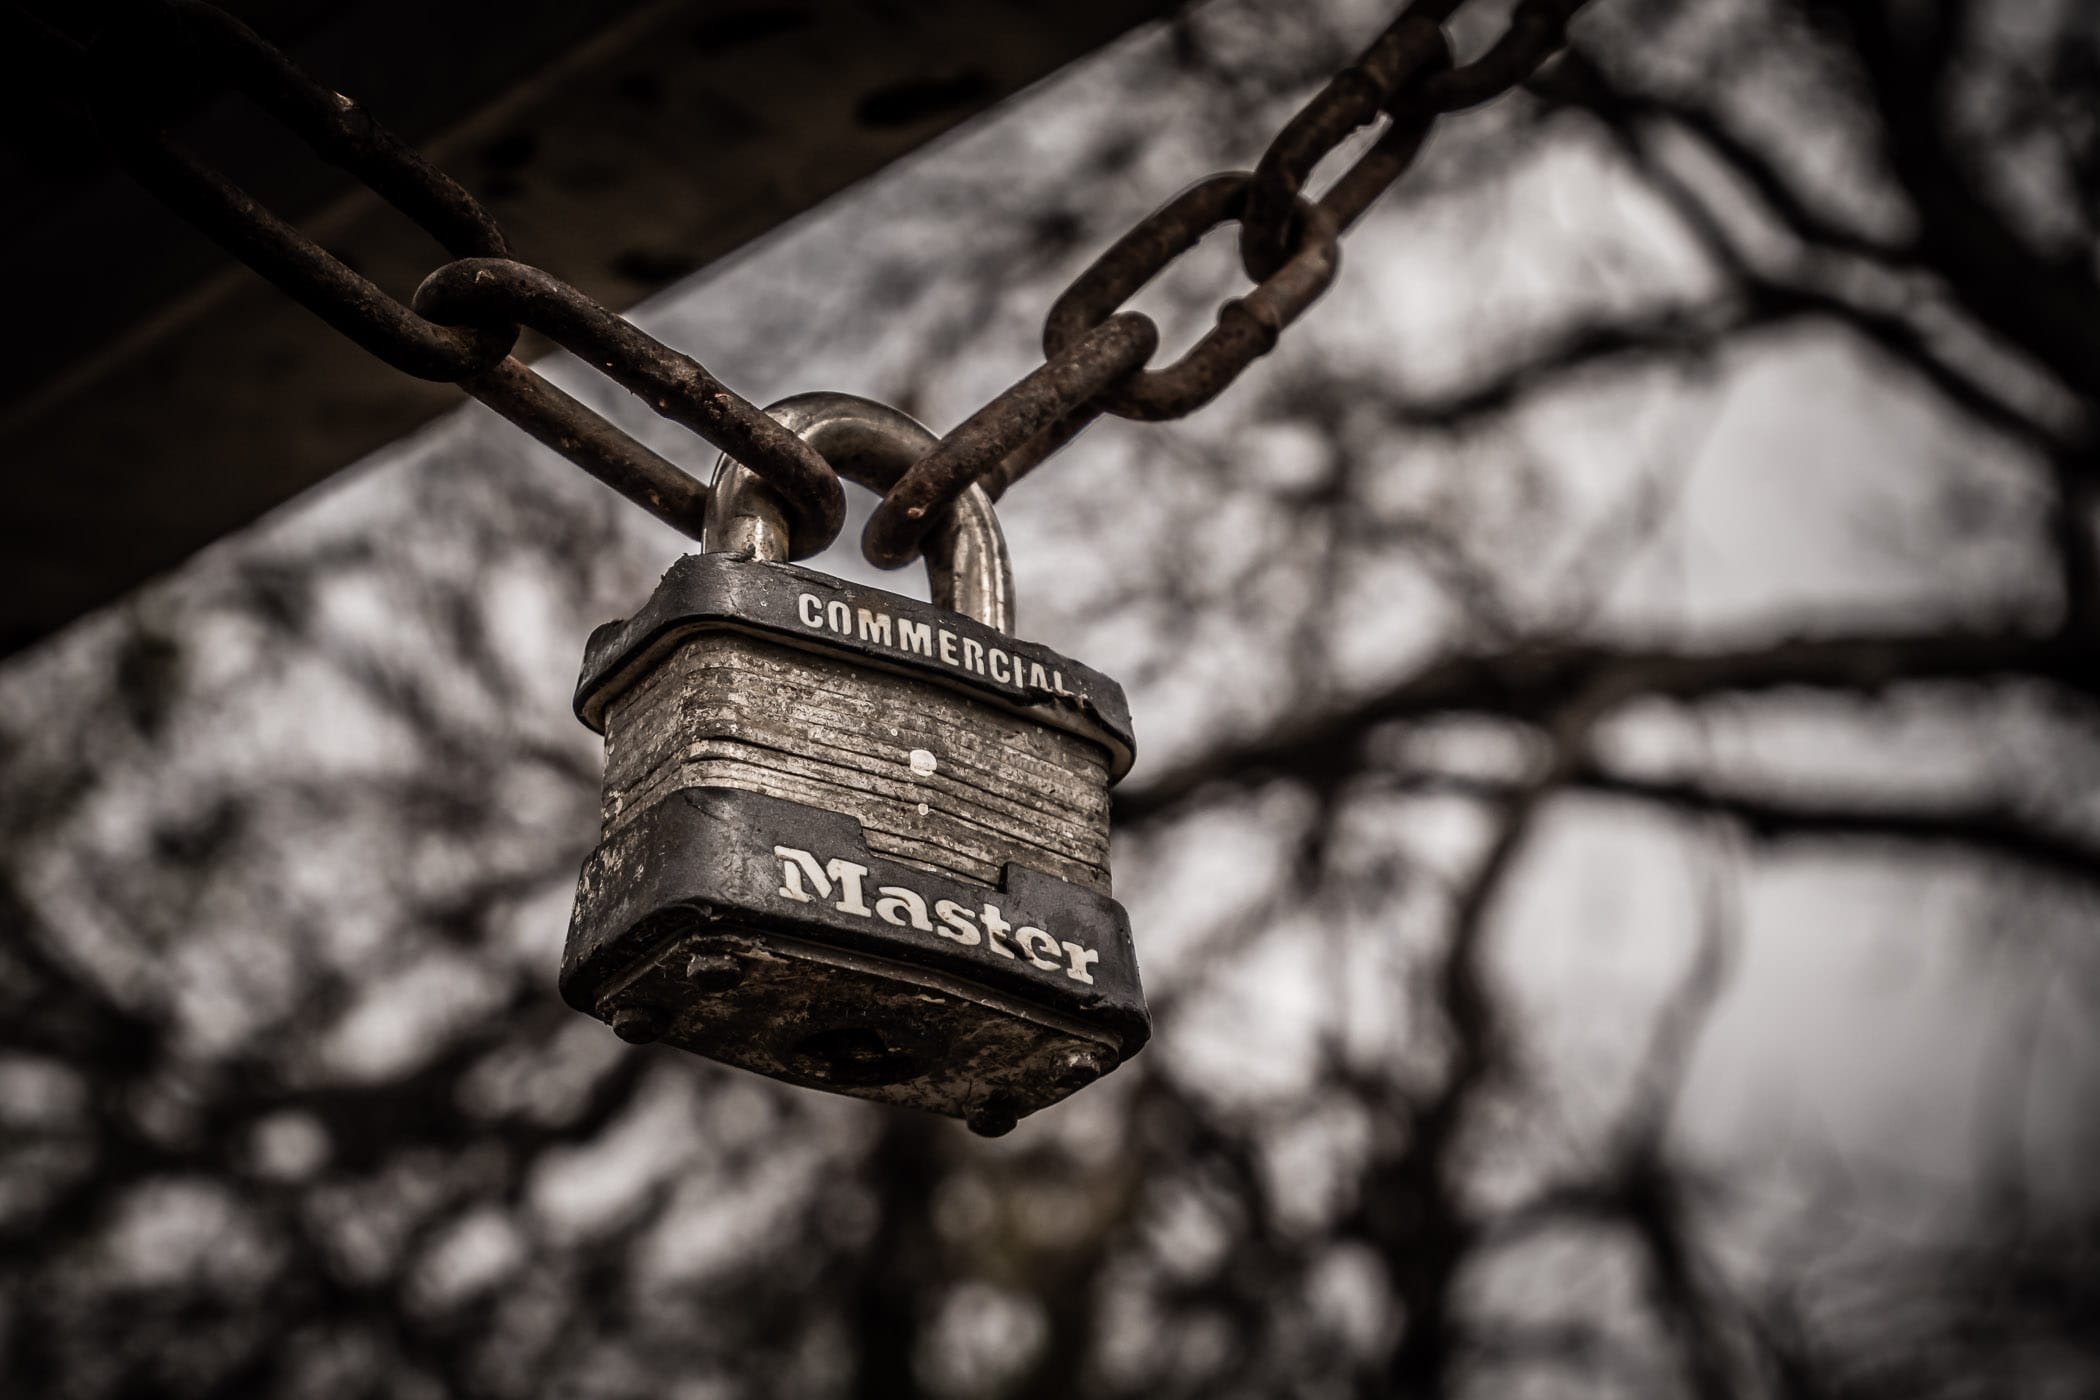 A padlock hangs from a chain in Richardson, Texas' Breckinridge Park.